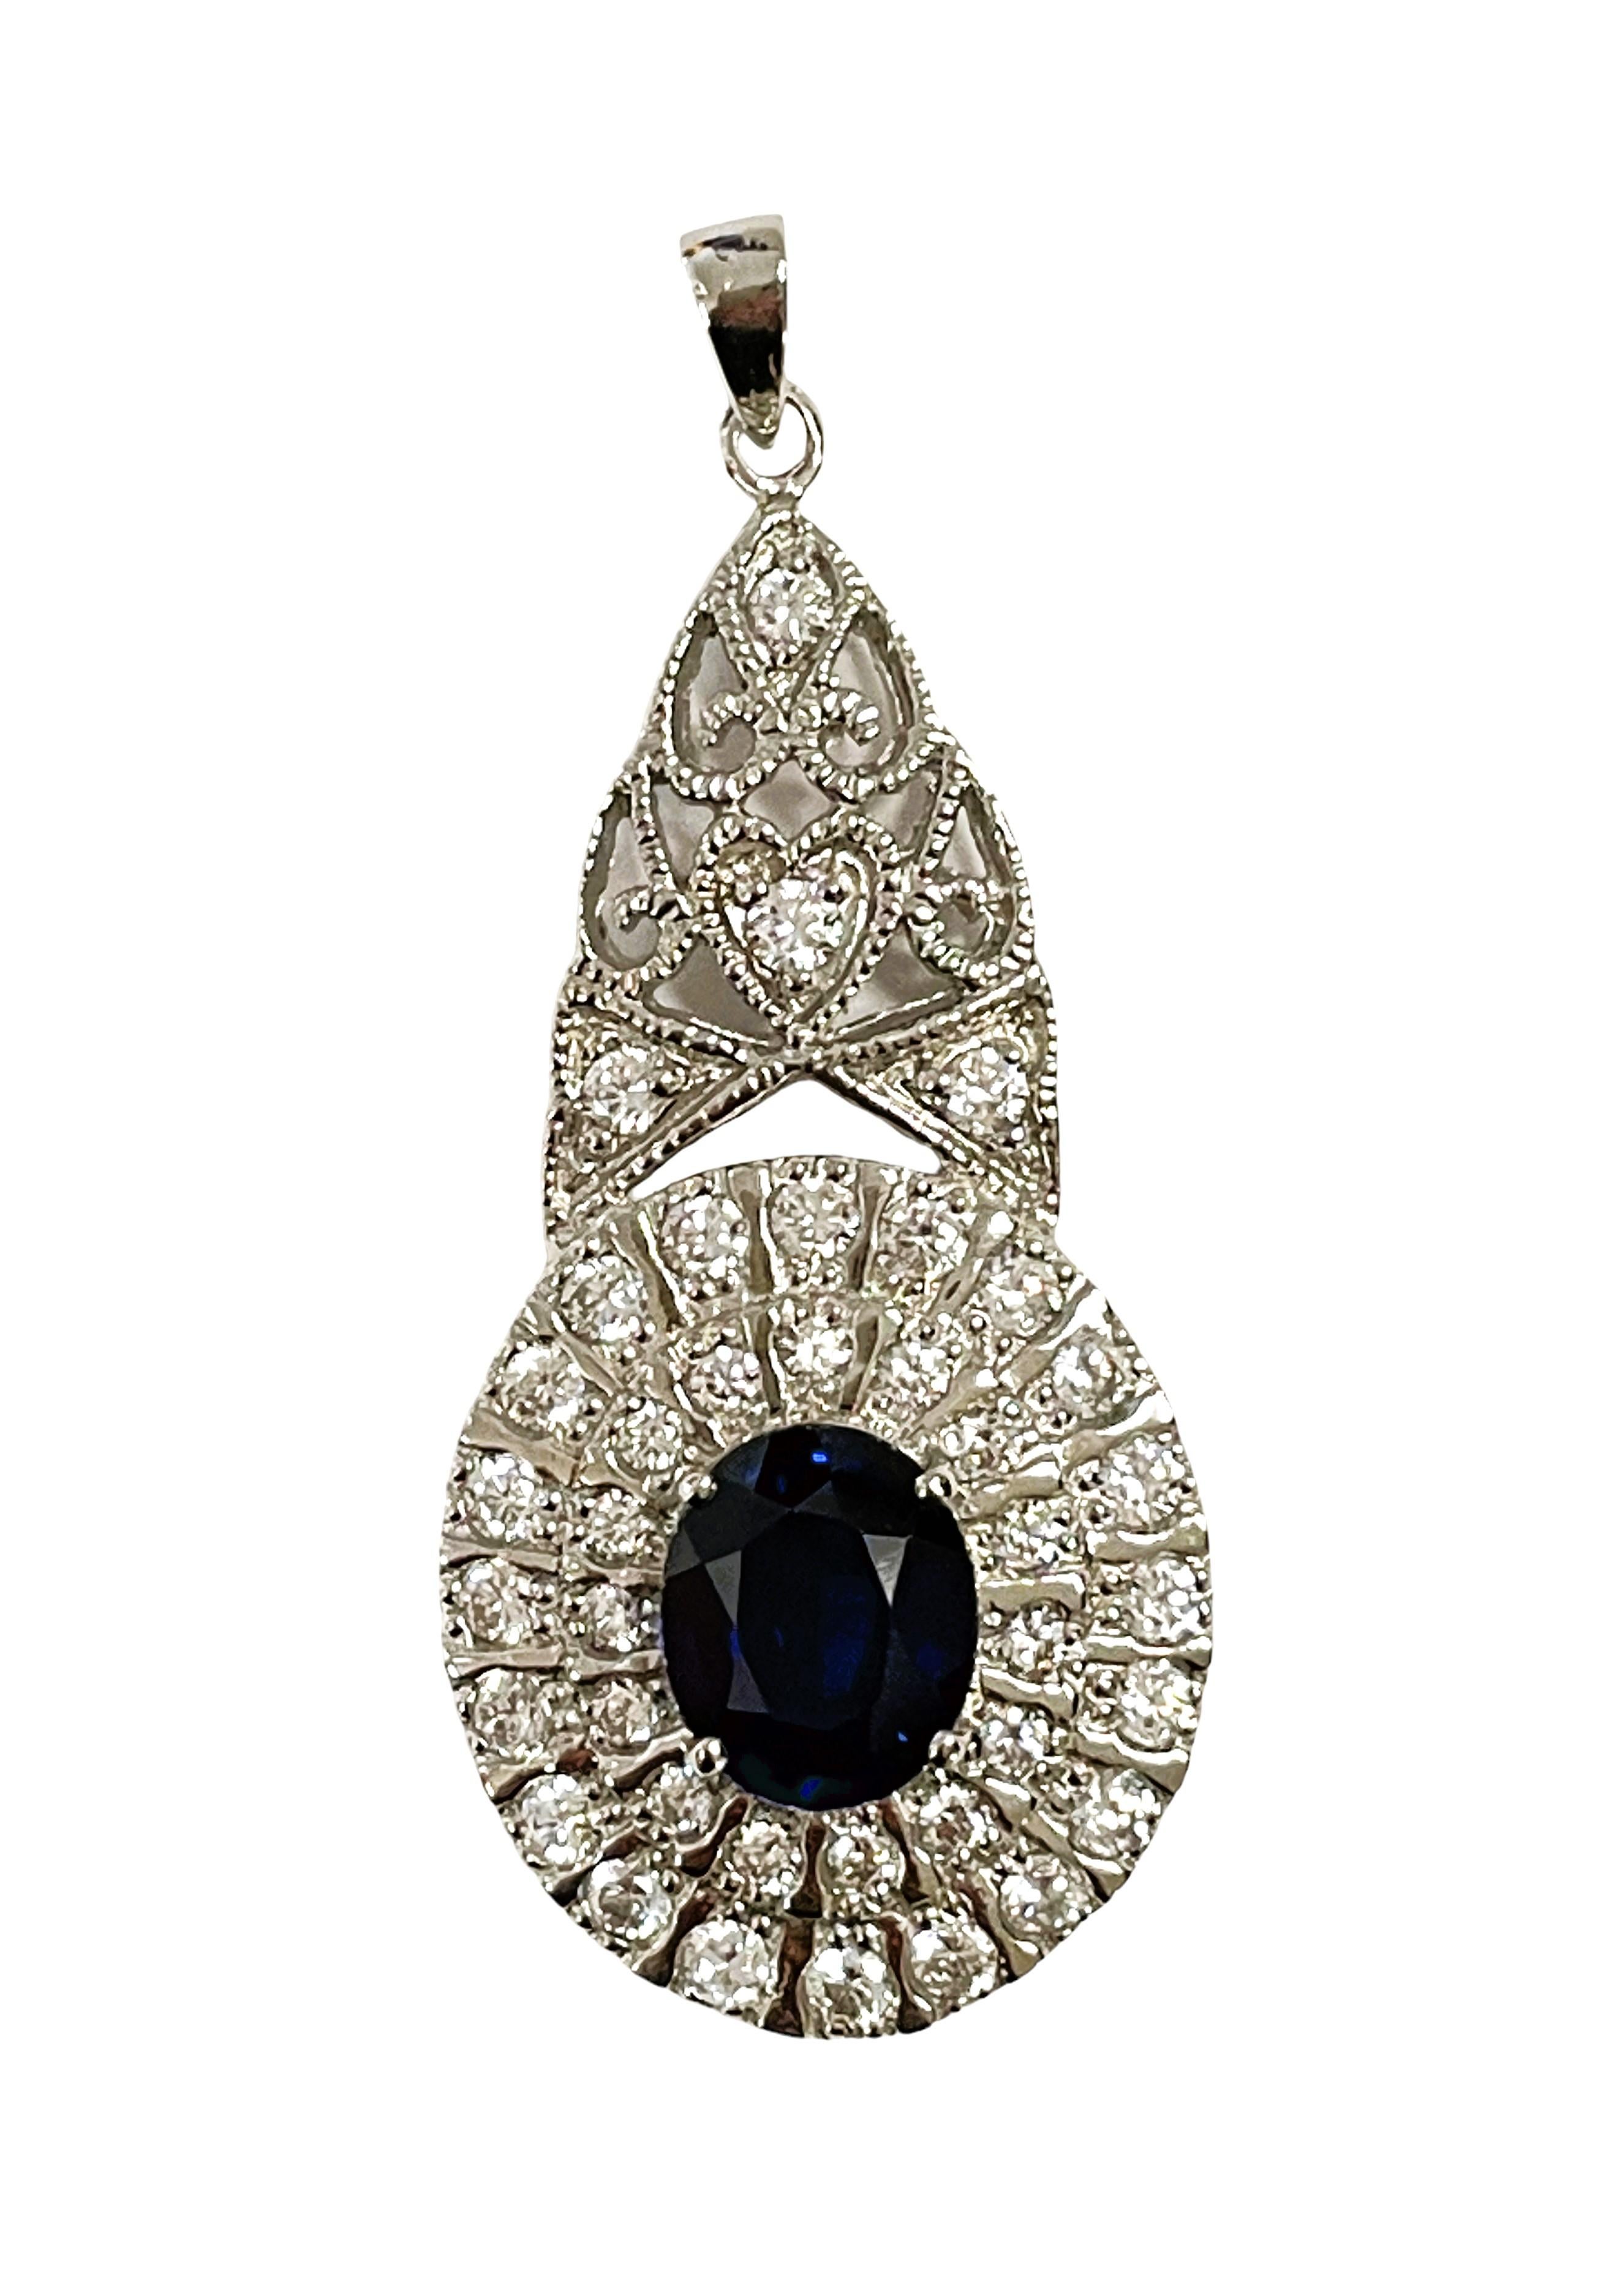 This pendant is just so beautiful!  The stone was mined in Africa and is just exquisite.  The IF stands for 